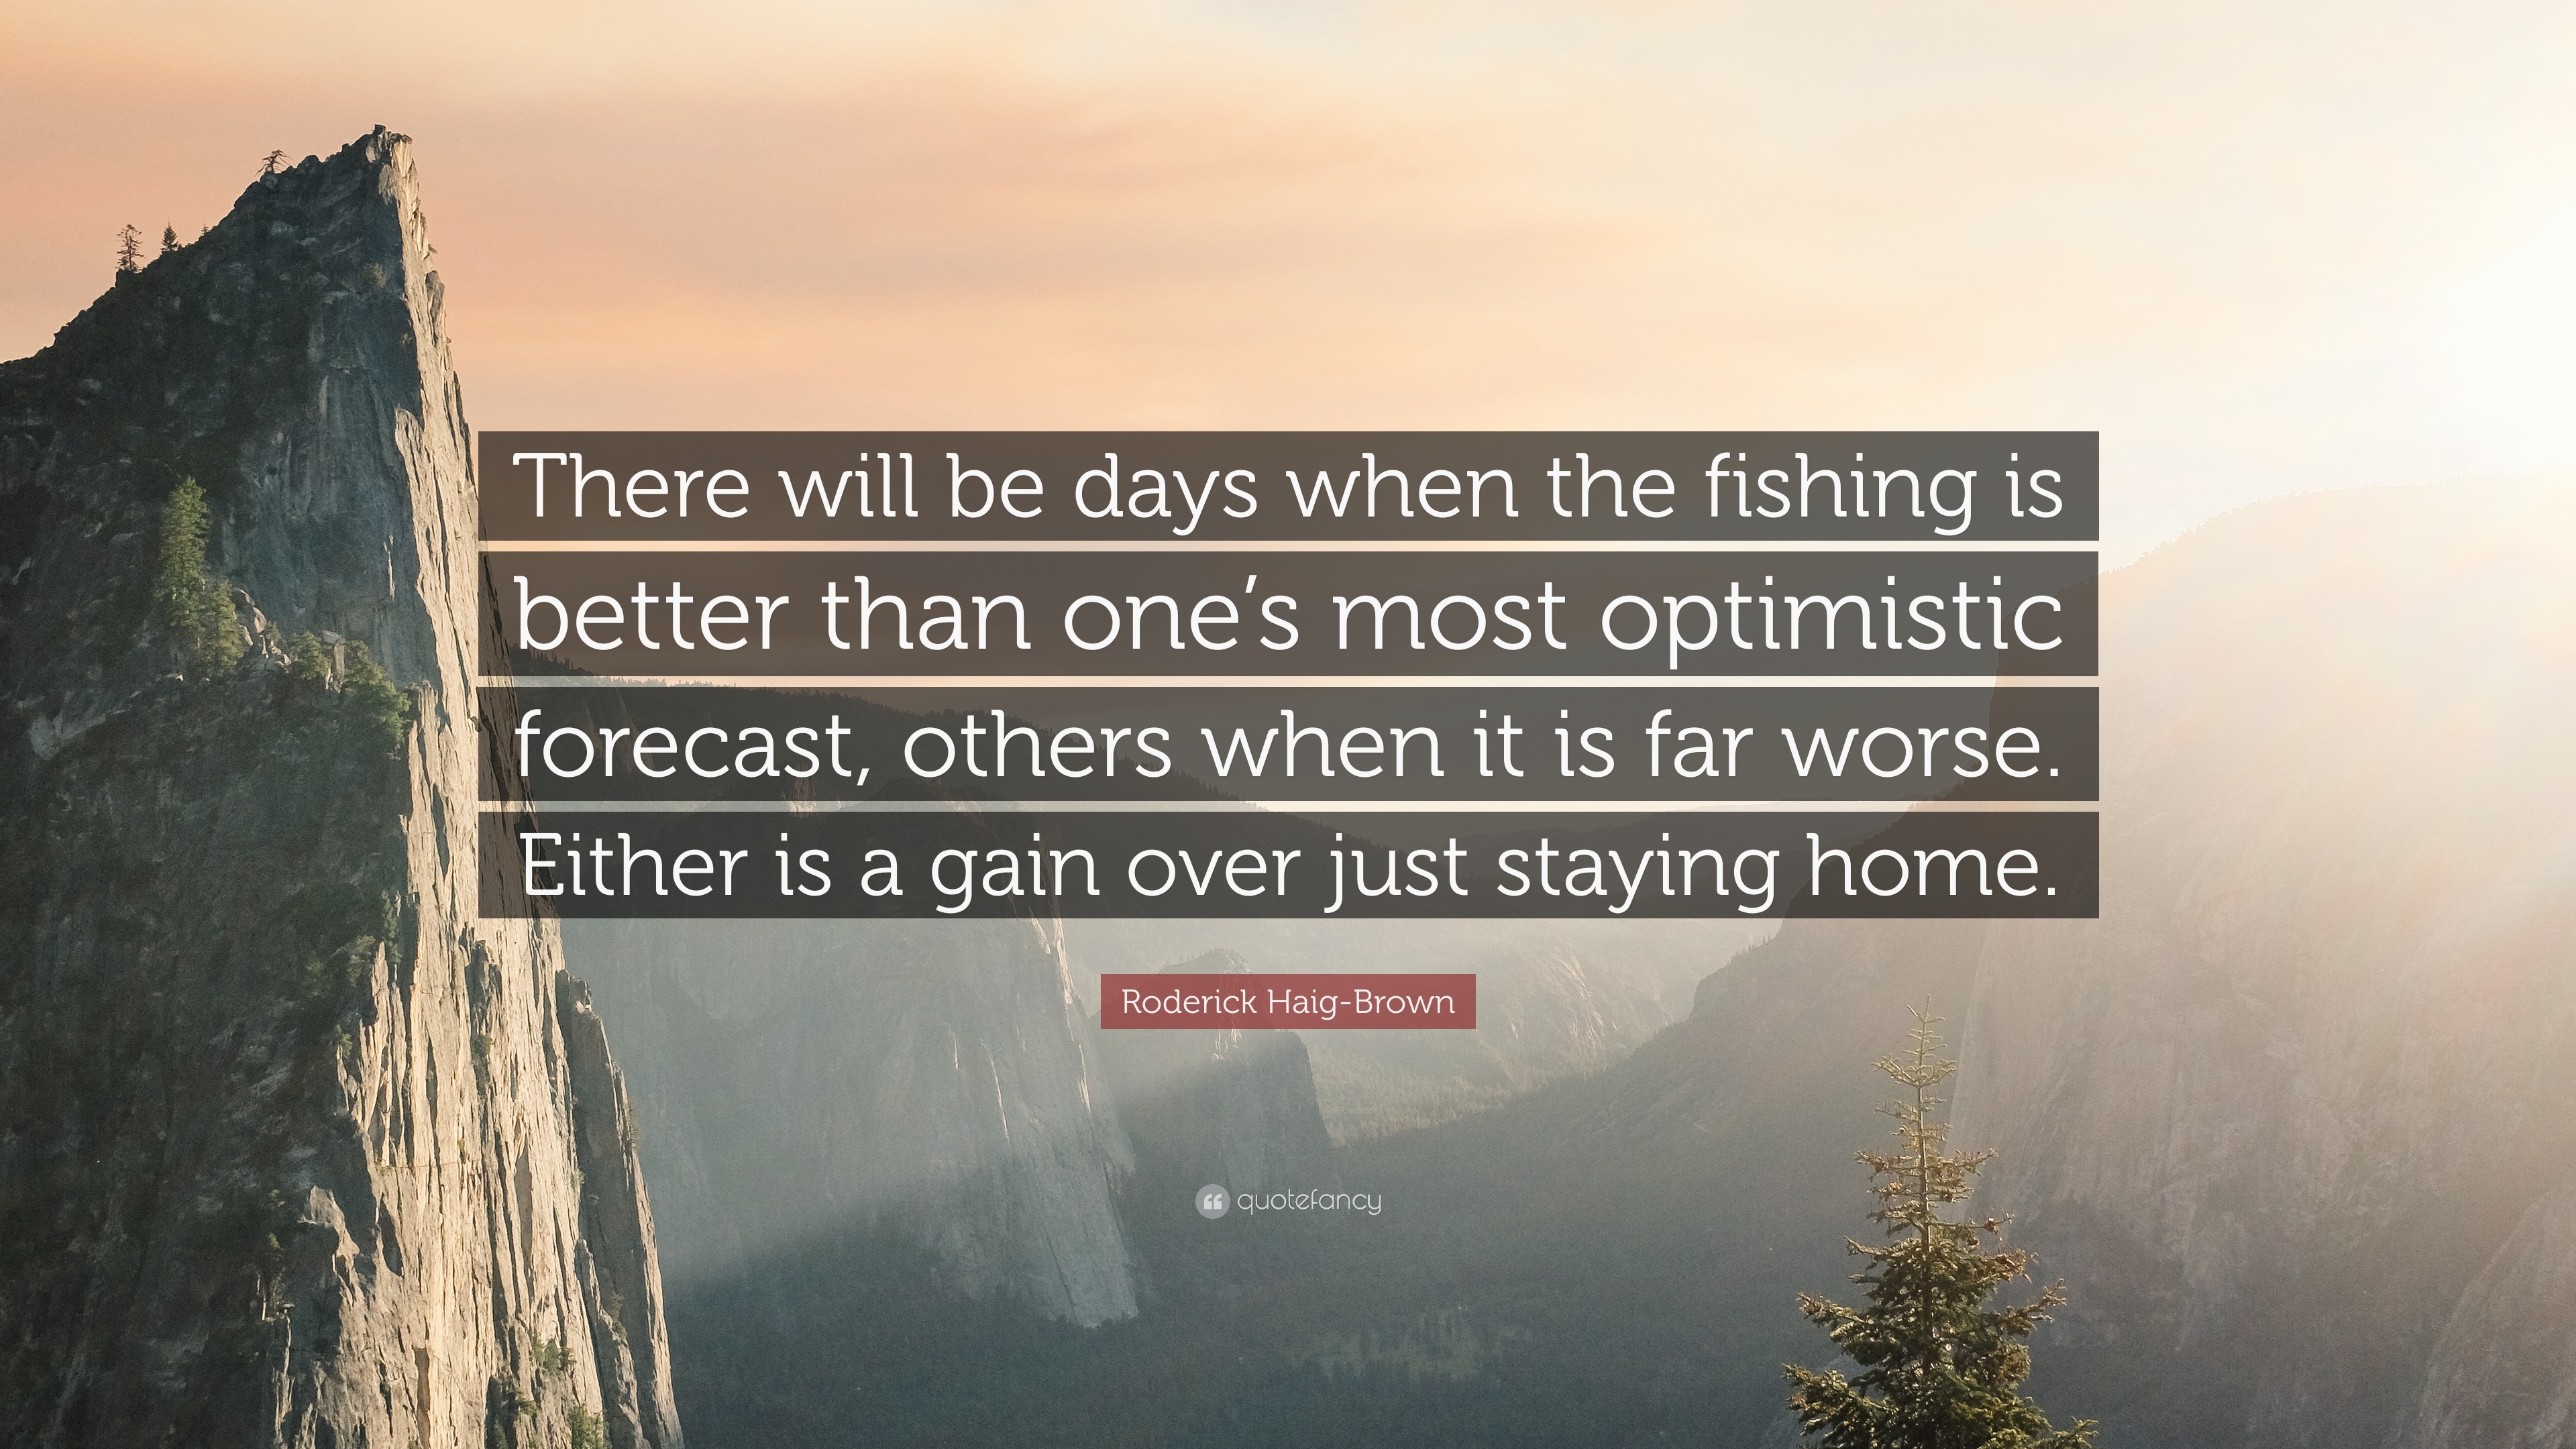 Roderick Haig-Brown Quote: “There will be days when the fishing is better  than one's most optimistic forecast, others when it is far worse. Either  i”